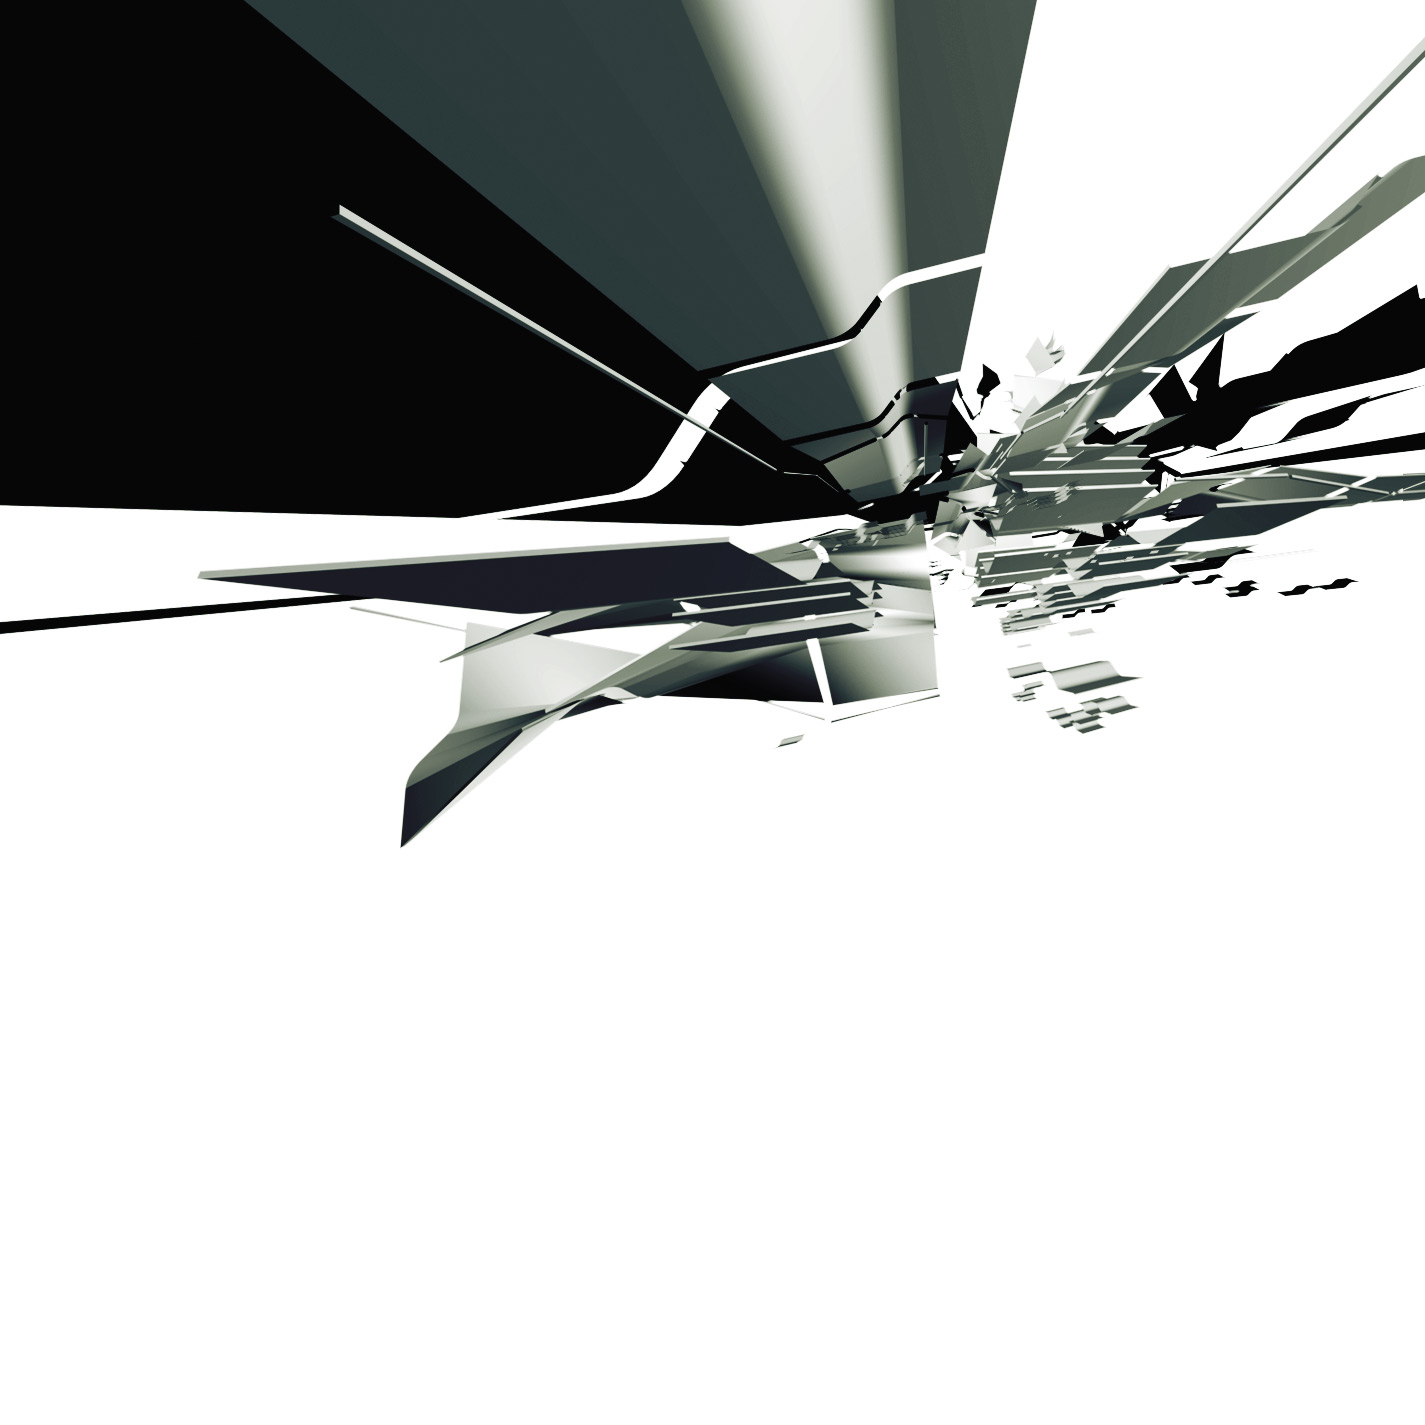 Musical album art containing abstract 3D shapes with an exaggerated perspective displayed on a white background.